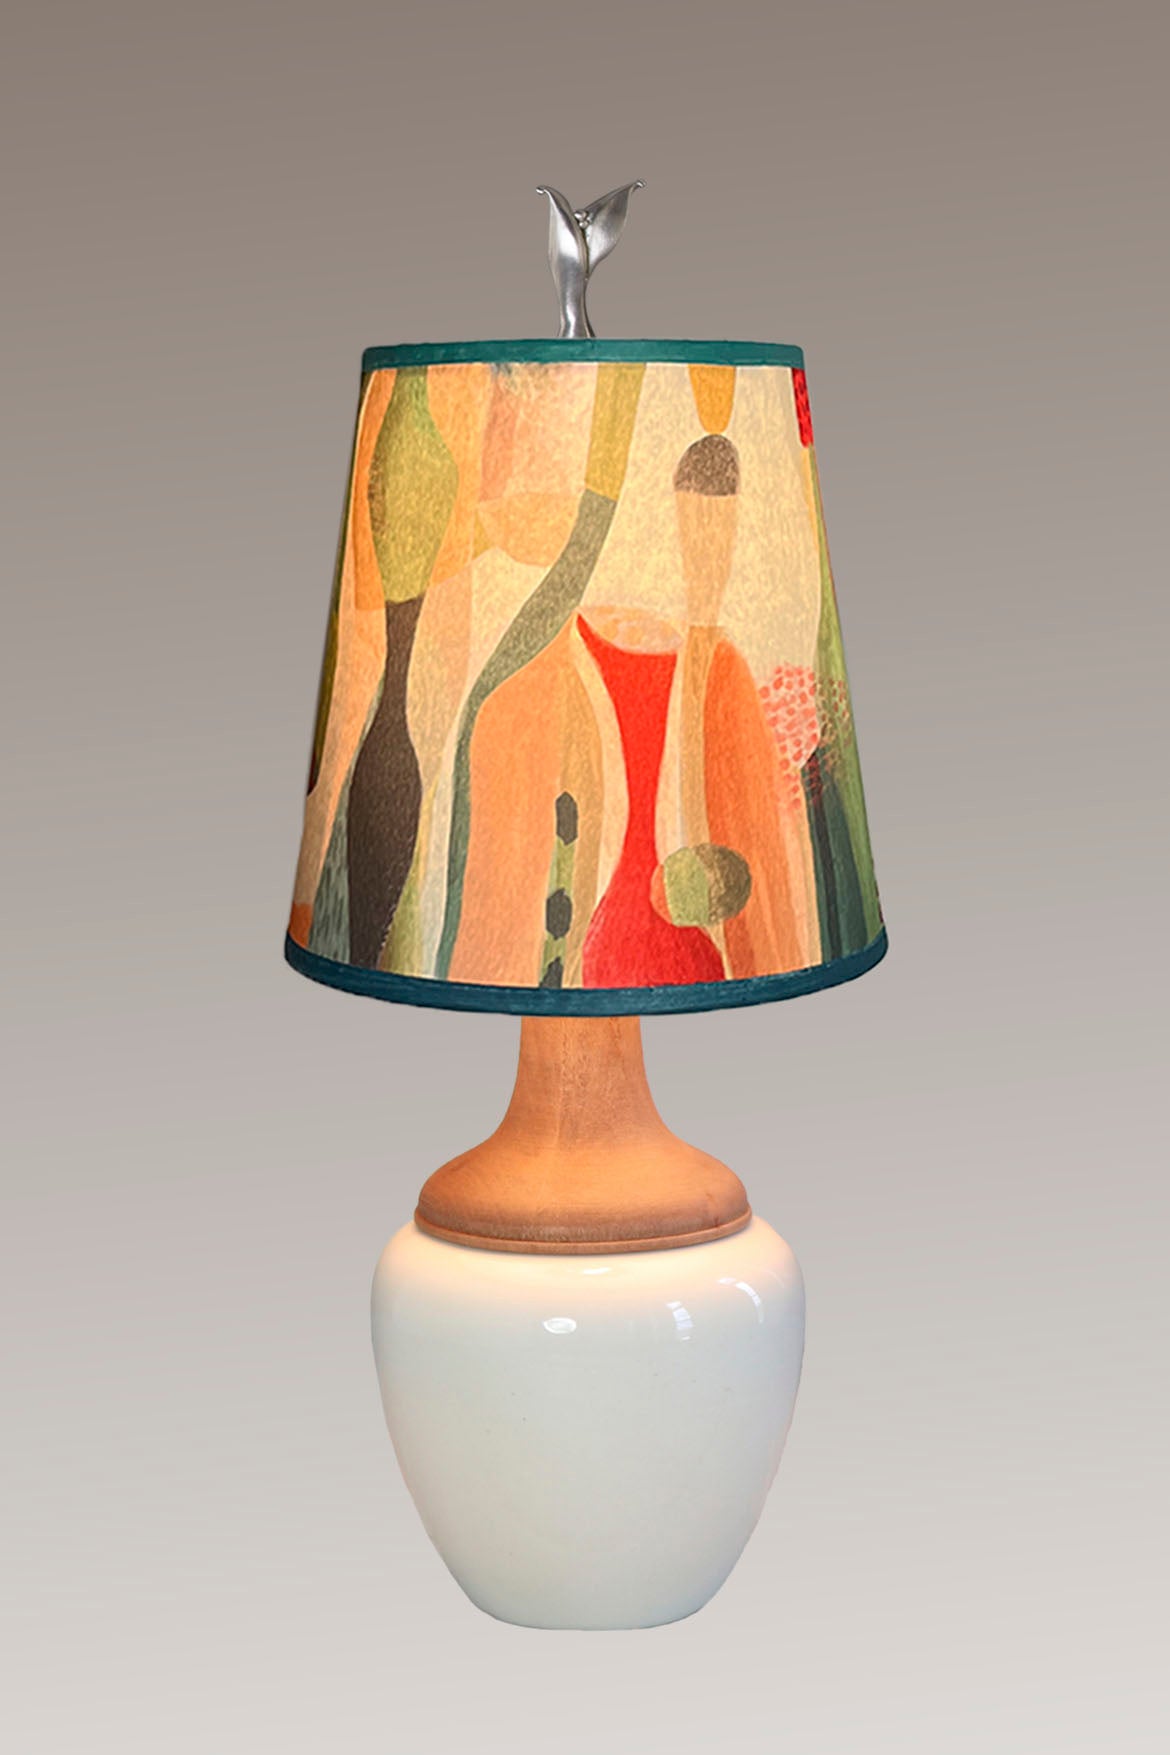 Janna Ugone & Co Table Lamp Ceramic and Maple Table Lamp in Ivory Gloss with Small Drum Shade in Riviera in Poppy